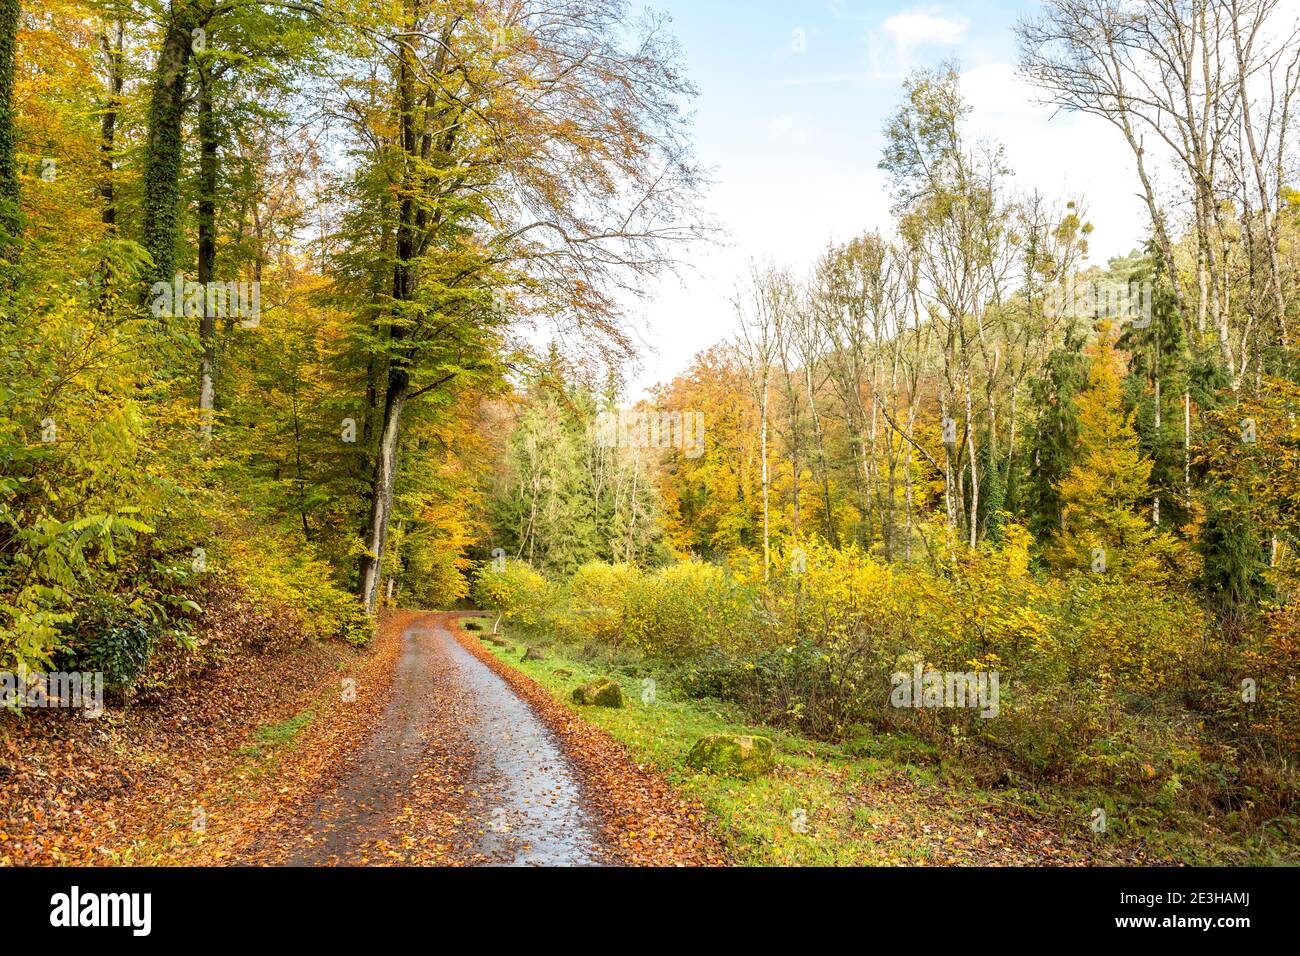 Autumn forests scene with country road leading down a hill Stock Photo